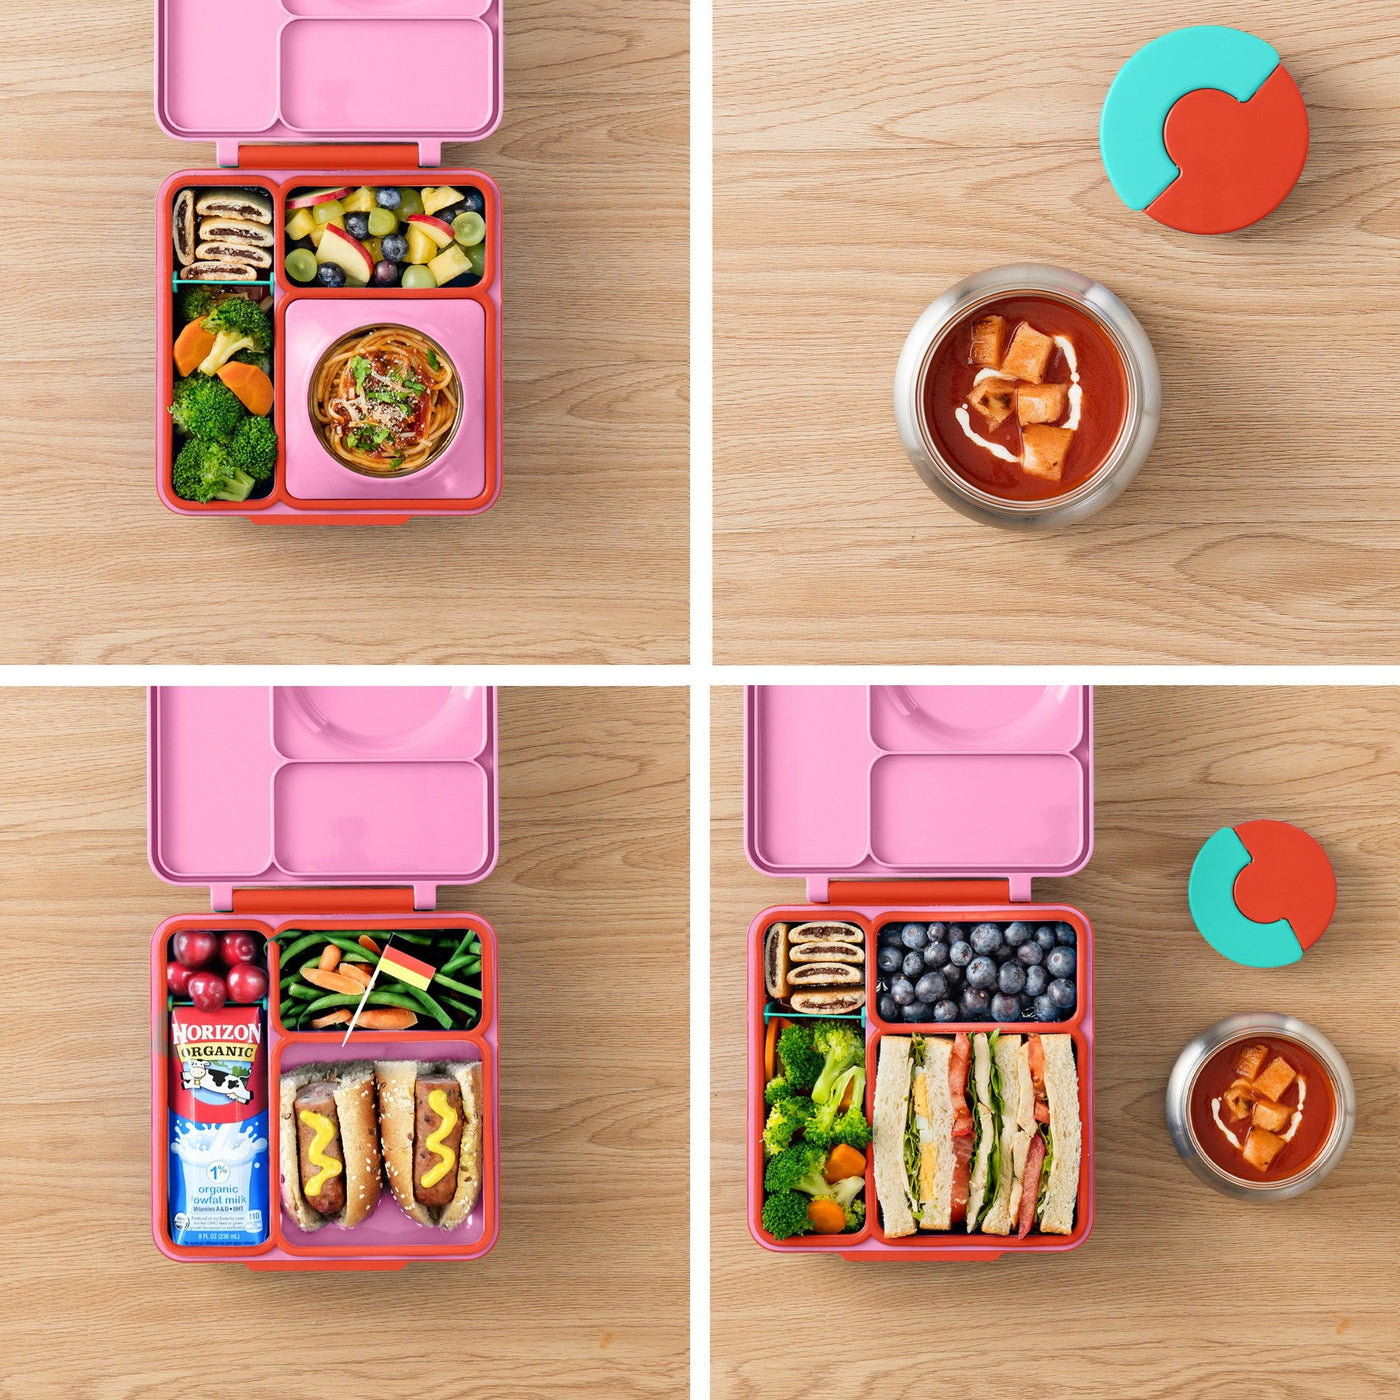 OmieBox - Pink Berry - Bento Box for Kids Insulated Bento Lunch Box with Leak Proof Thermos Food Jar